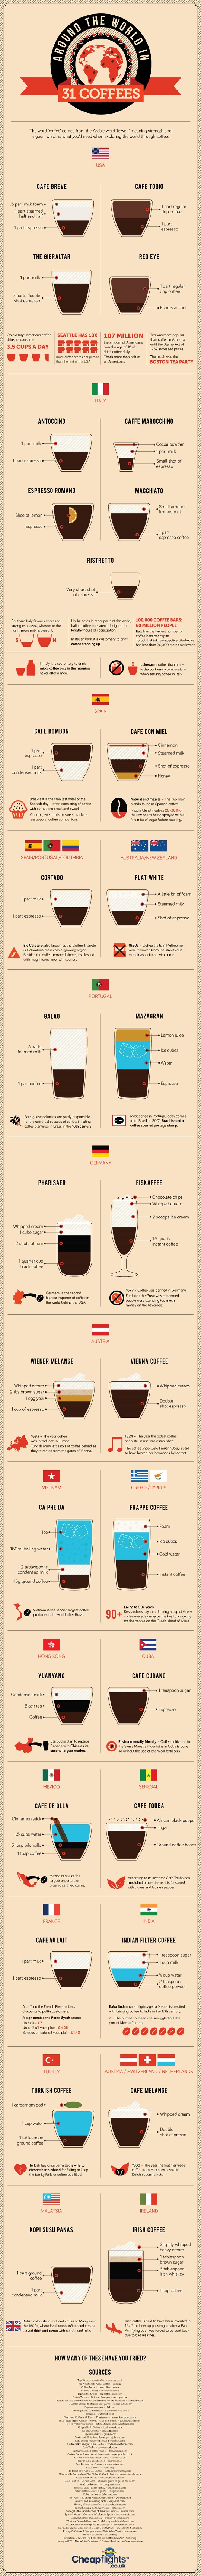 Around the World in 31 Coffees